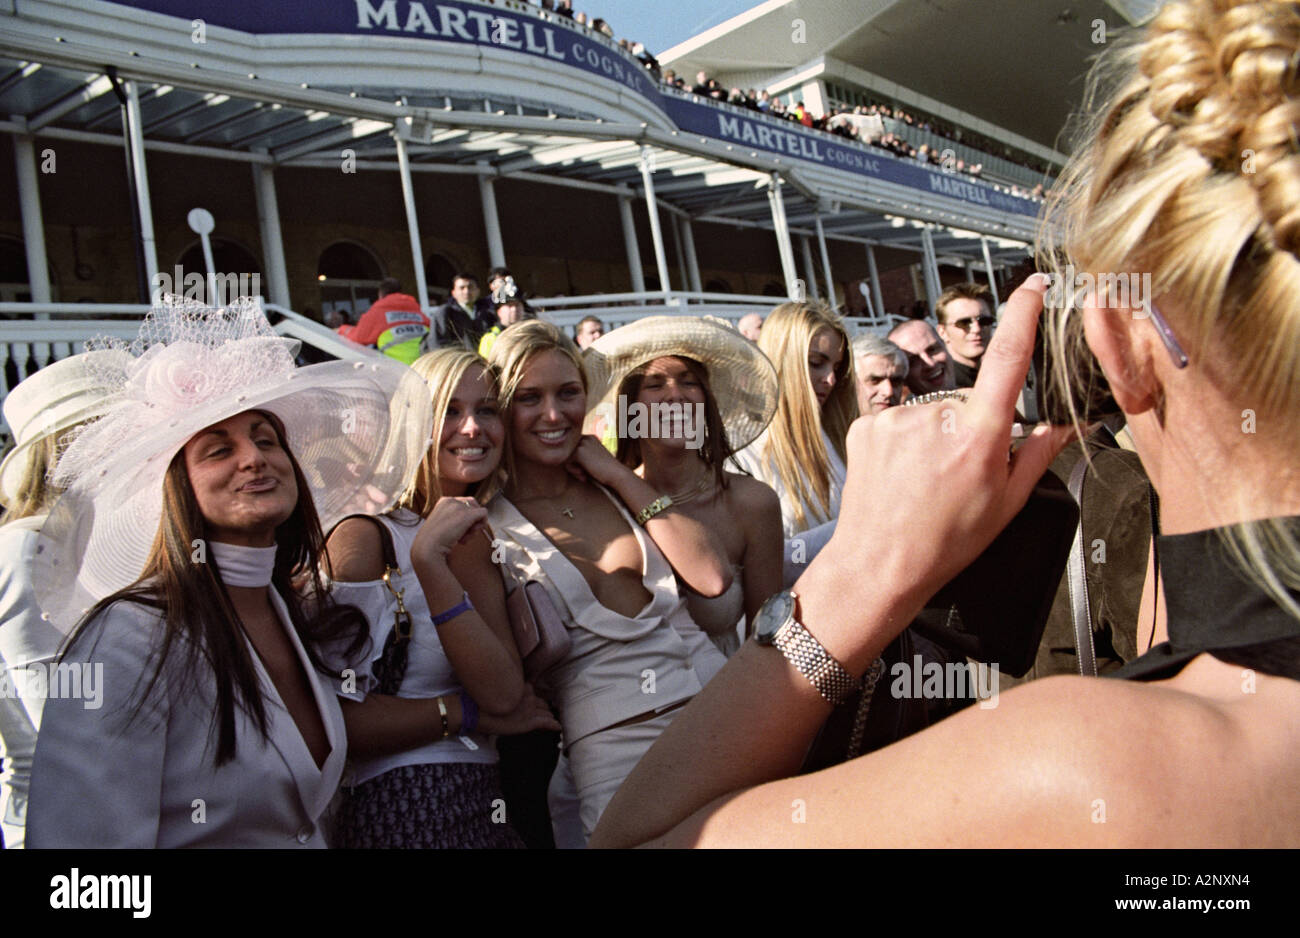 Aintree Racecourse, Liverpool UK. Young women pose for a photo at the Grand National horse race Stock Photo